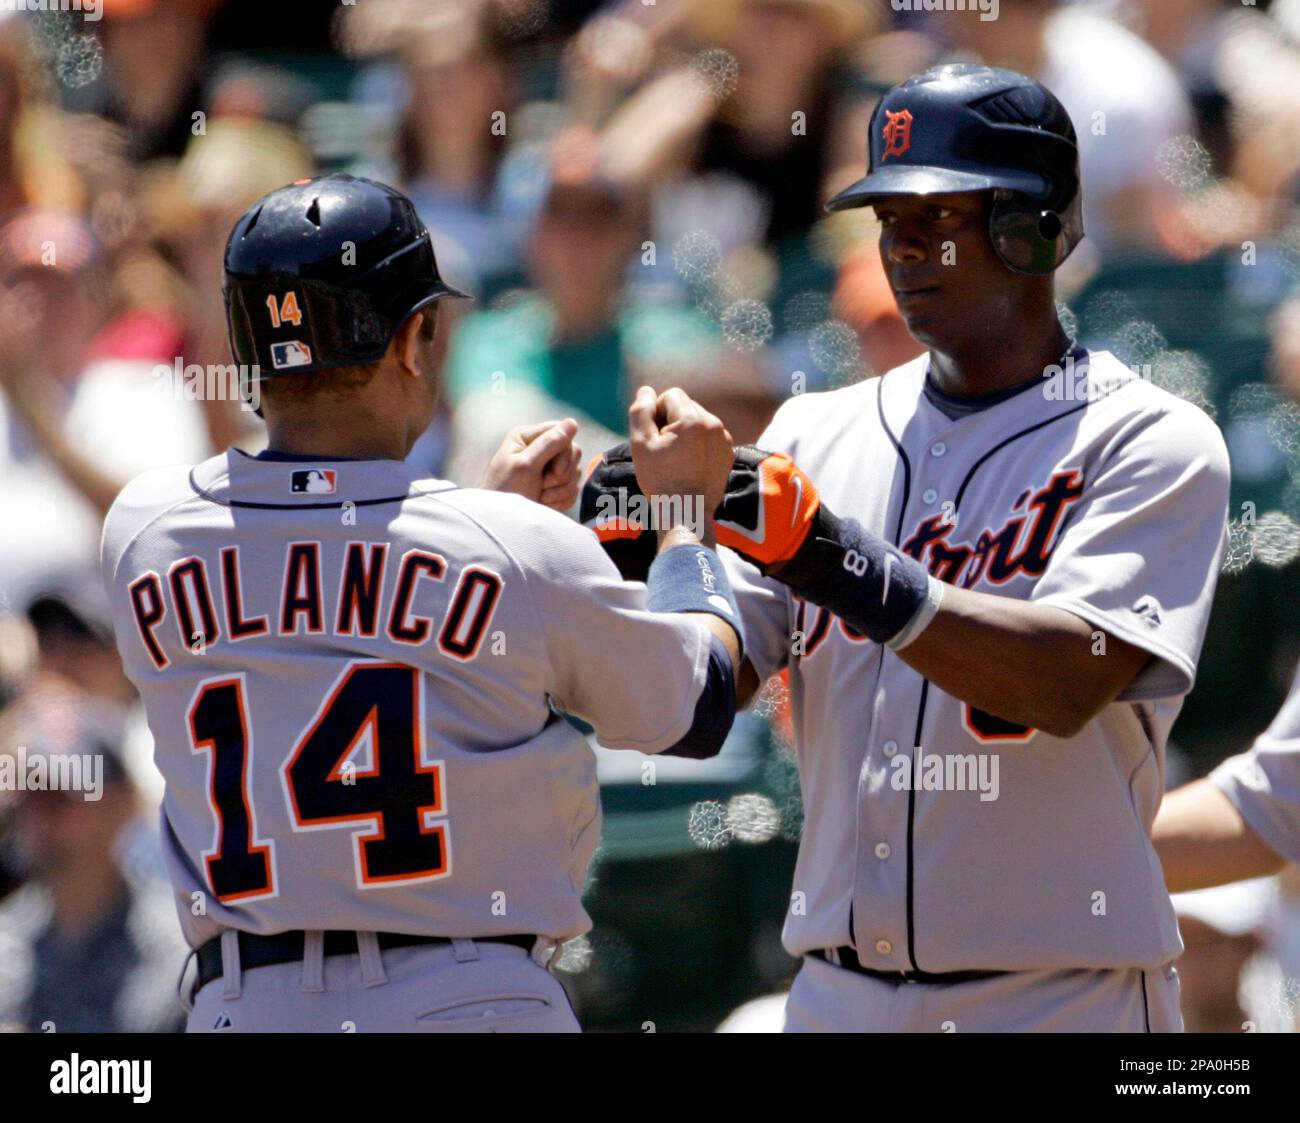 Detroit Tigers' Placido Polanco, right, is congratulated by Miguel Cabrera  after scoring in the third inning of a baseball game against the Kansas  City Royals, Saturday, Aug. 30, 2008, in Detroit. (AP